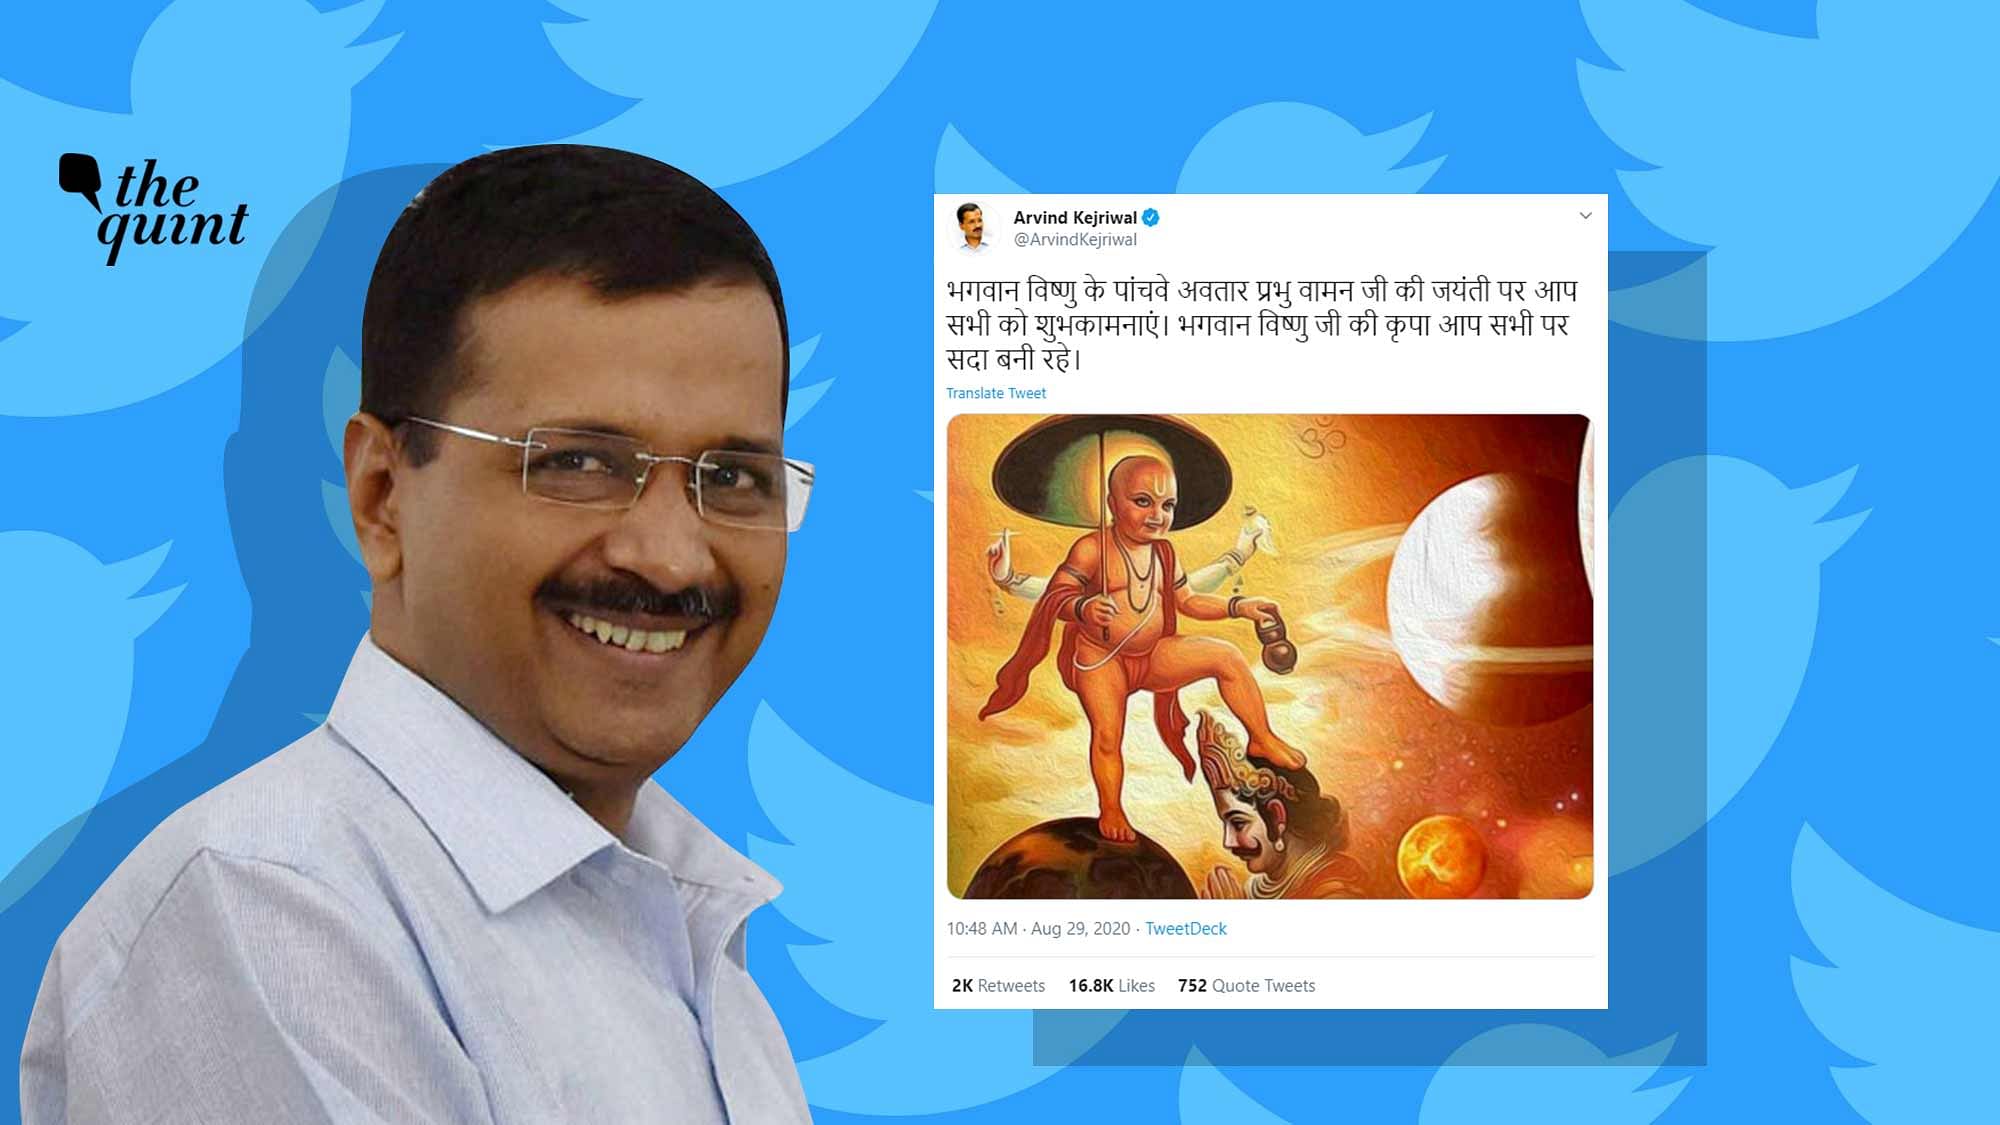 Delhi Chief Minister Arvind Kejriwal was trolled on Twitter for his Vamana Jayanti wishes